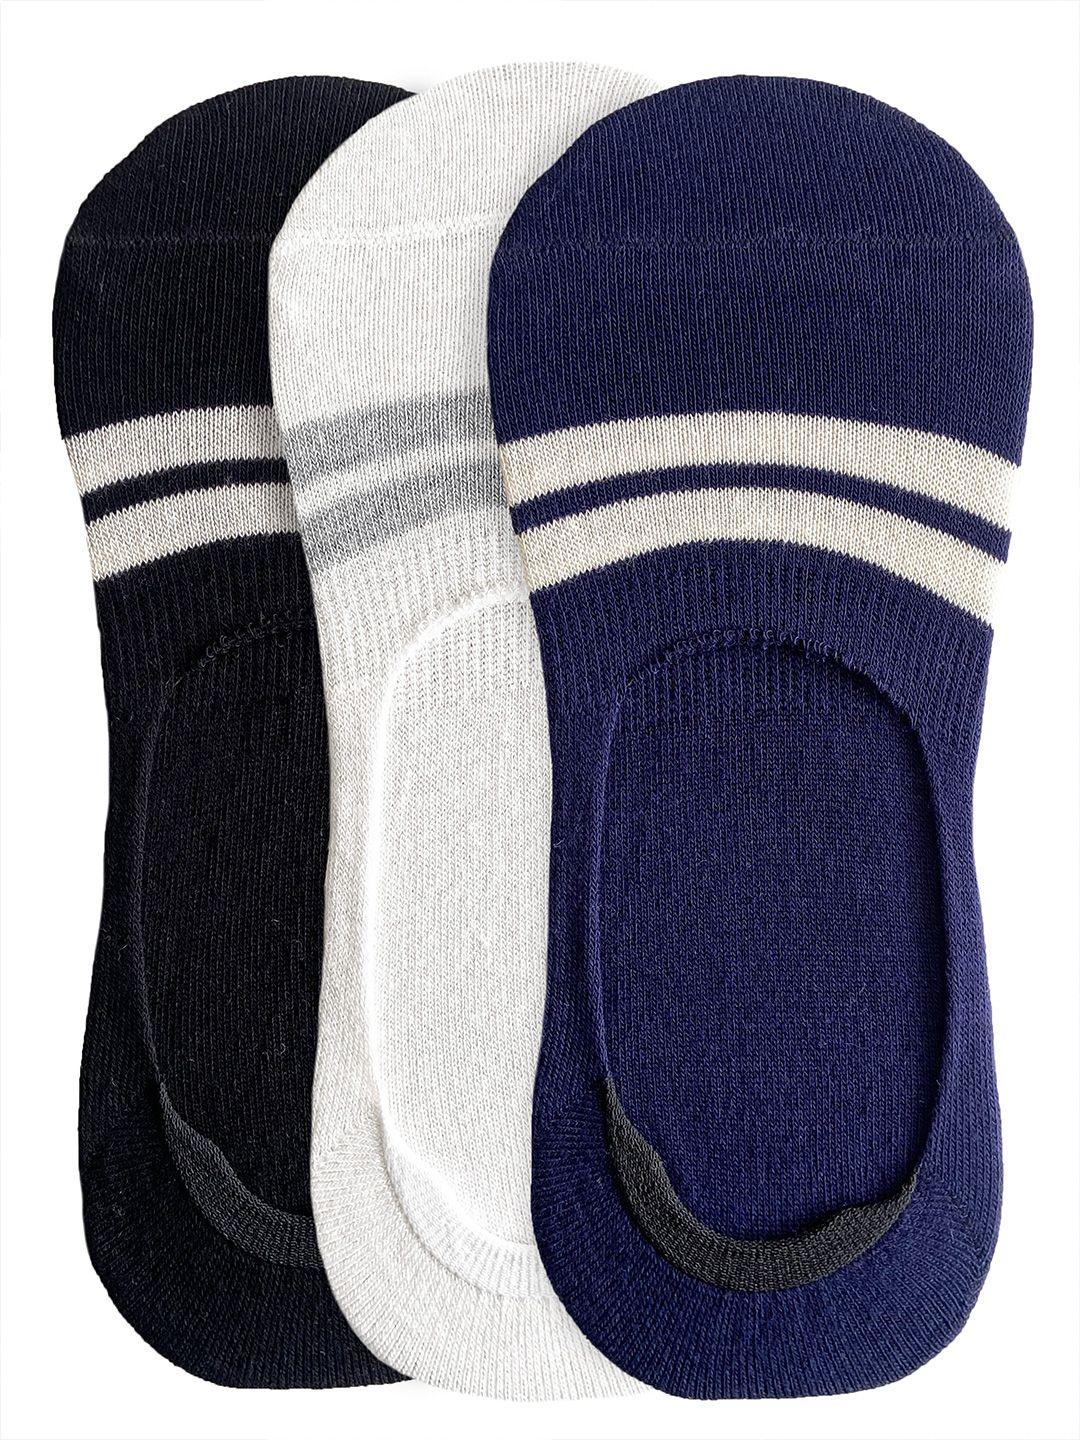 heelium-men-navy-blue-and-white-pack-of-3-striped-shoe-liners